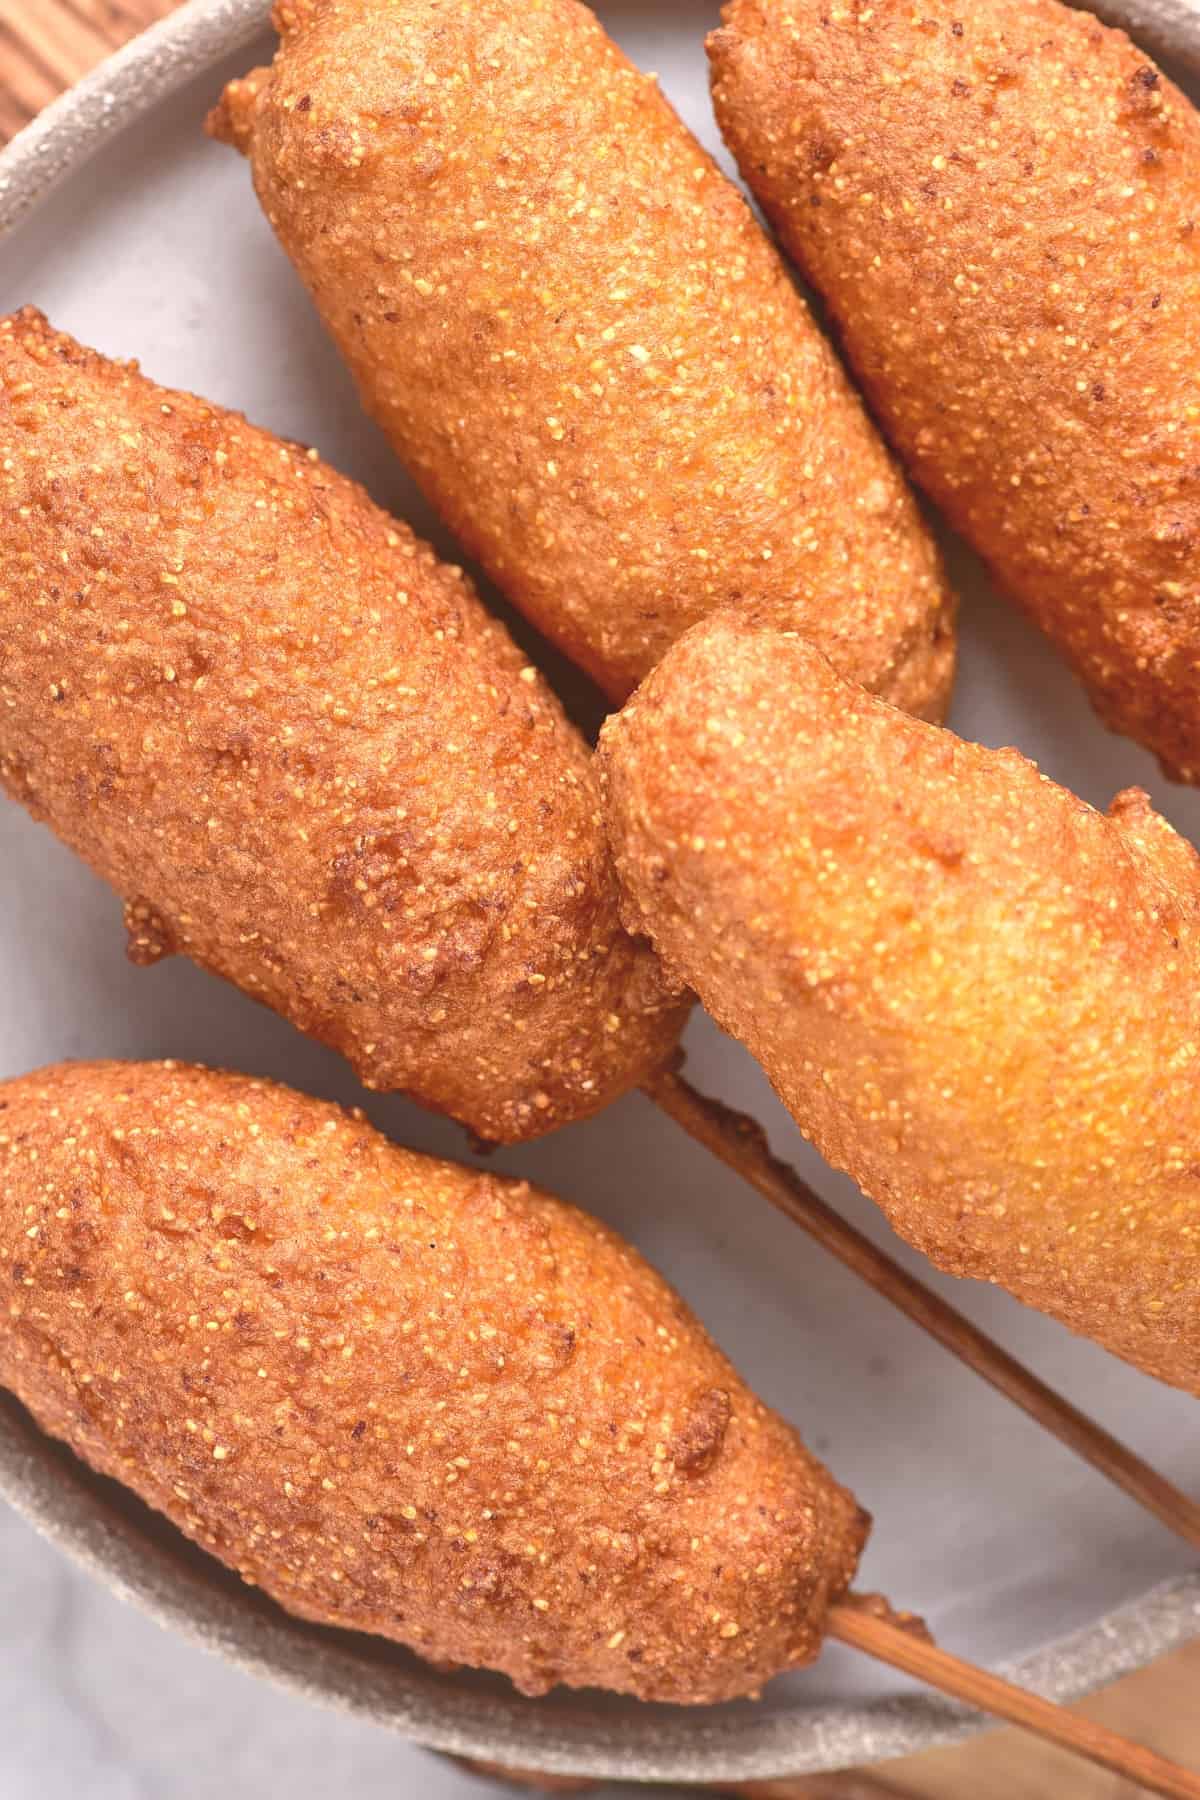 Top down view of gluten-free corn dog on a plate.